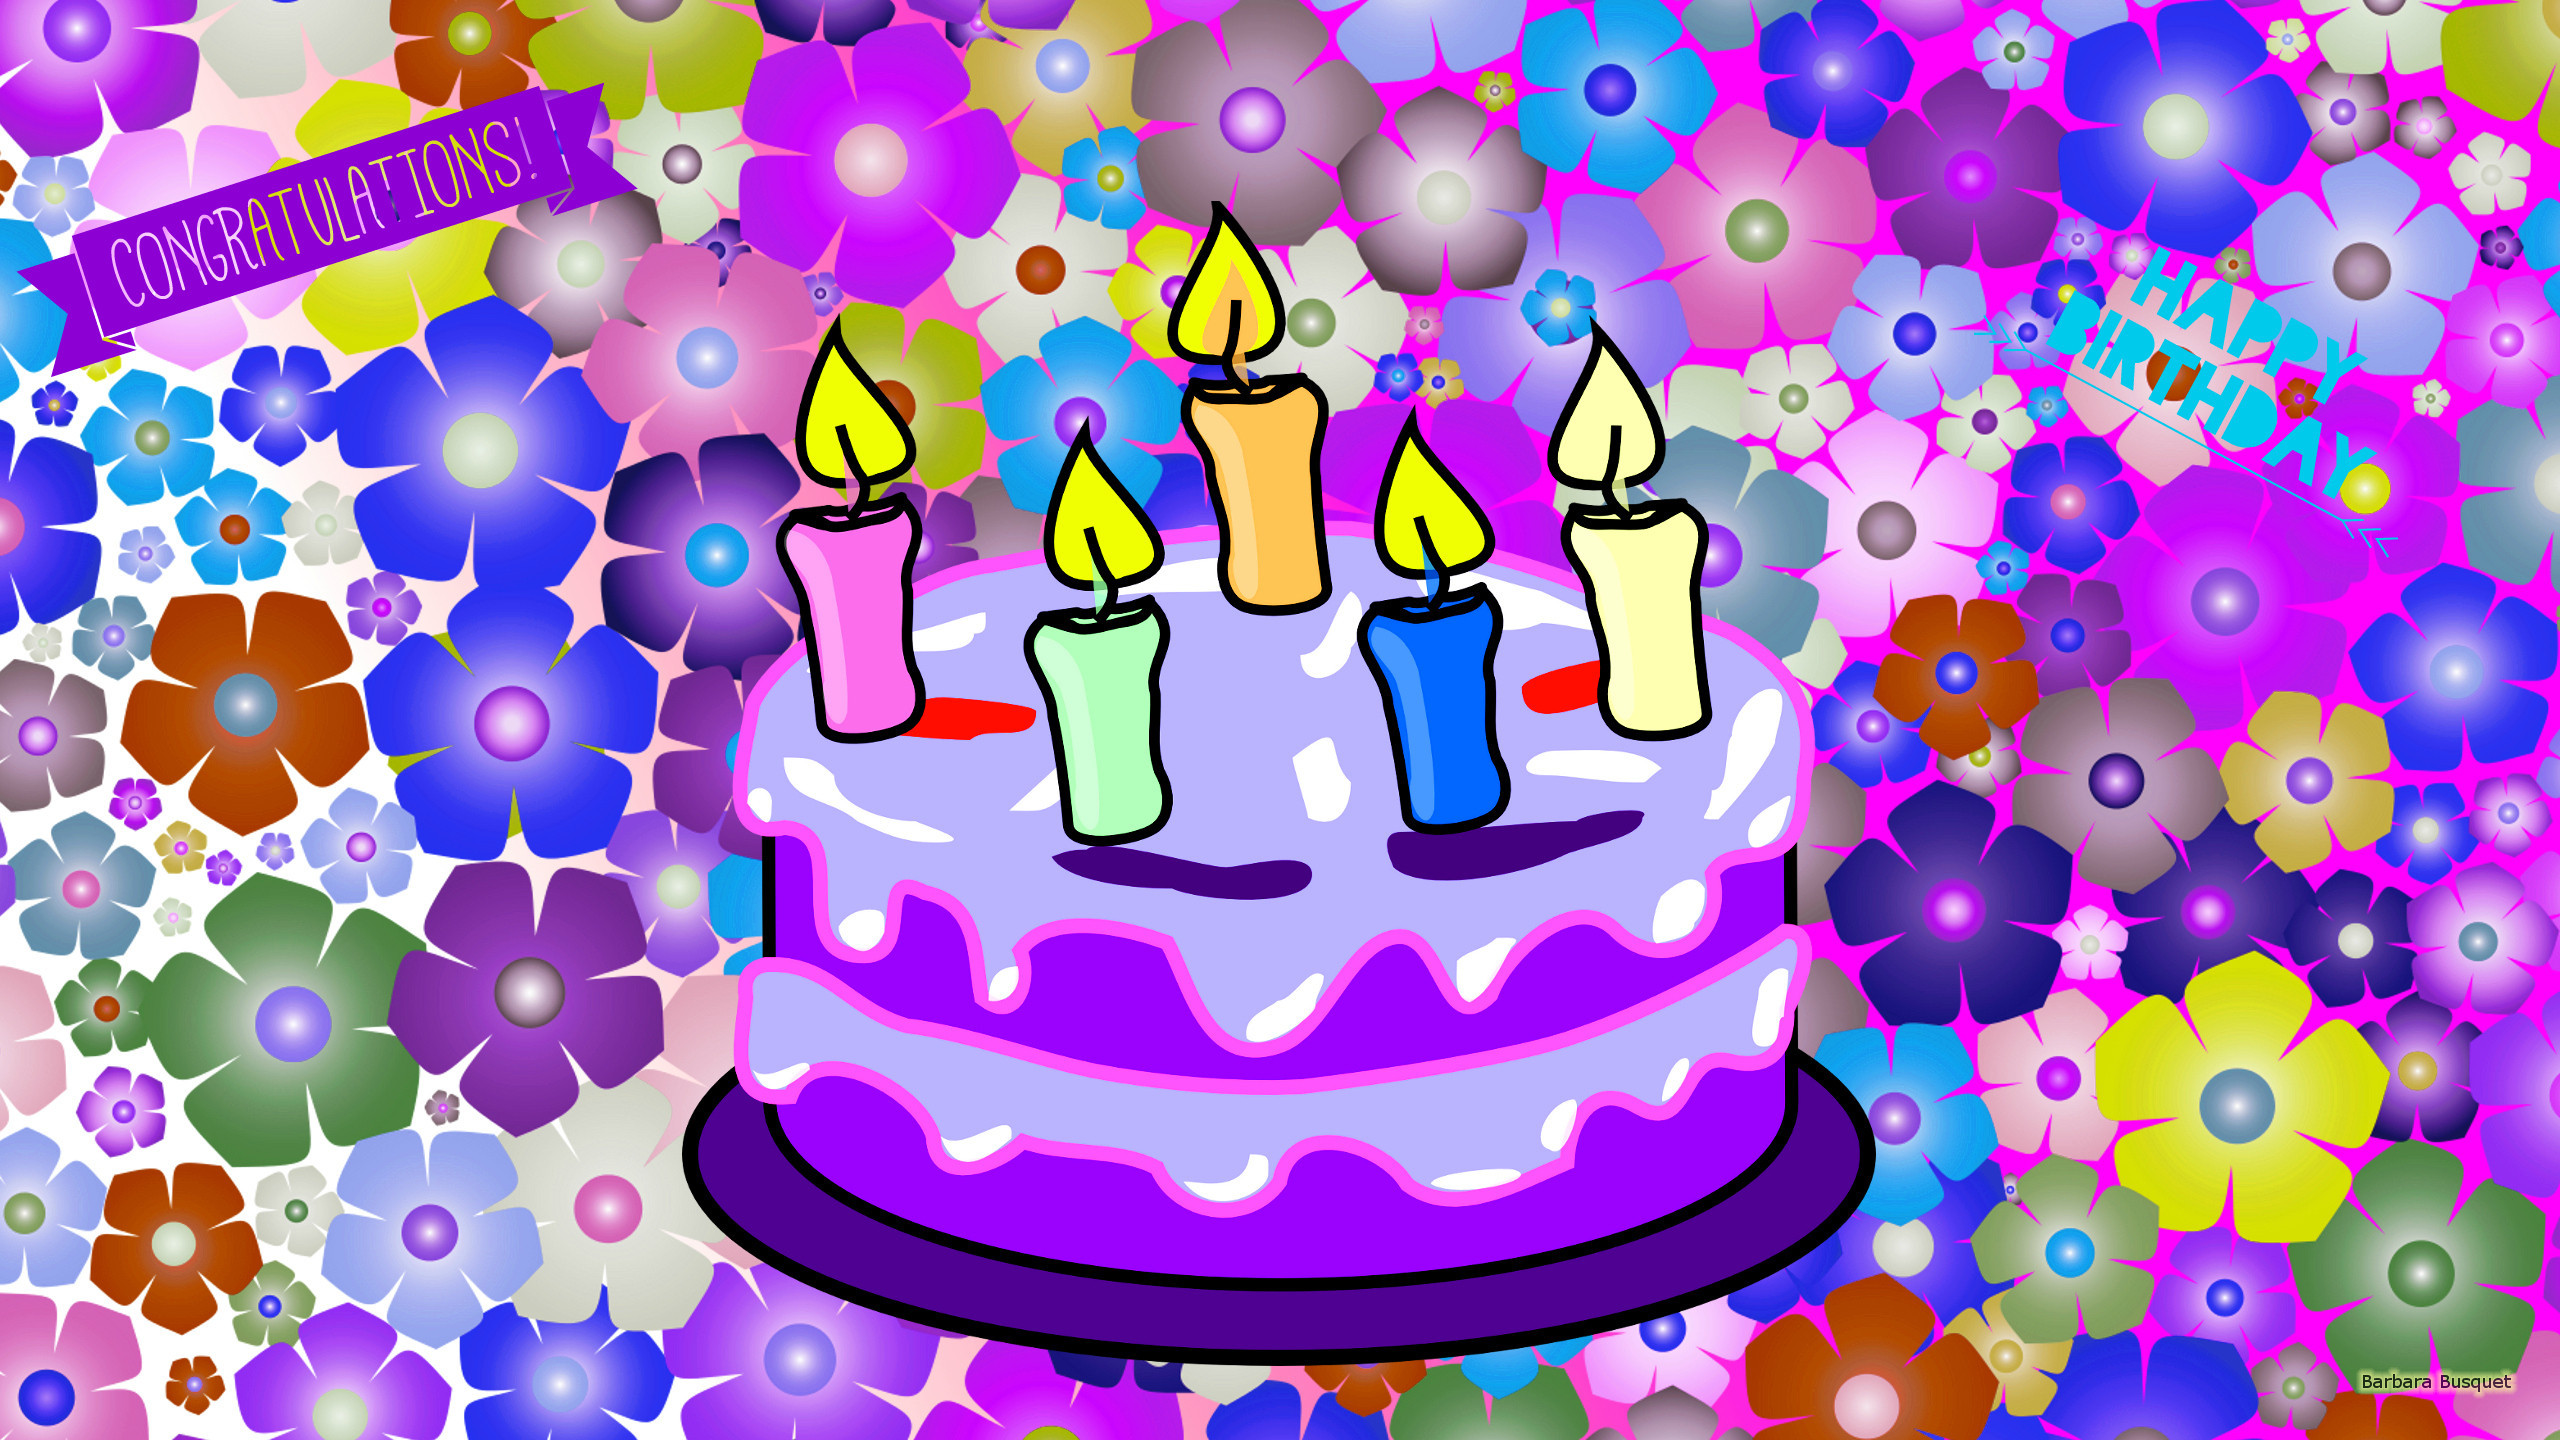 Purple birthday wallpaper with flowers and a cake with burning candles.